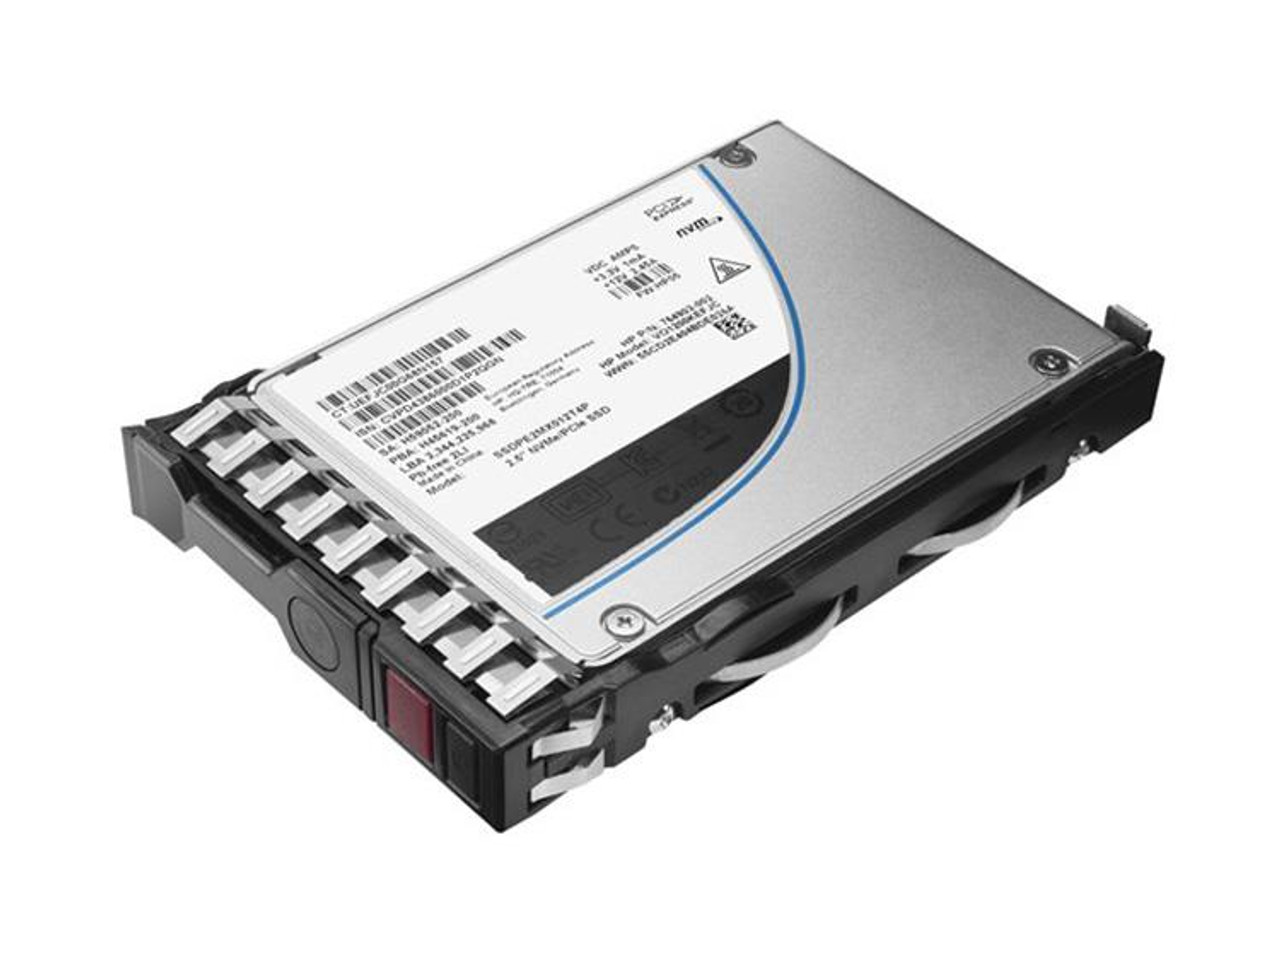 VK1600GEYJU HPE 1.6TB MLC SATA 6Gbps Read Intensive 2.5-inch Internal Solid State Drive (SSD) with Smart Carrier